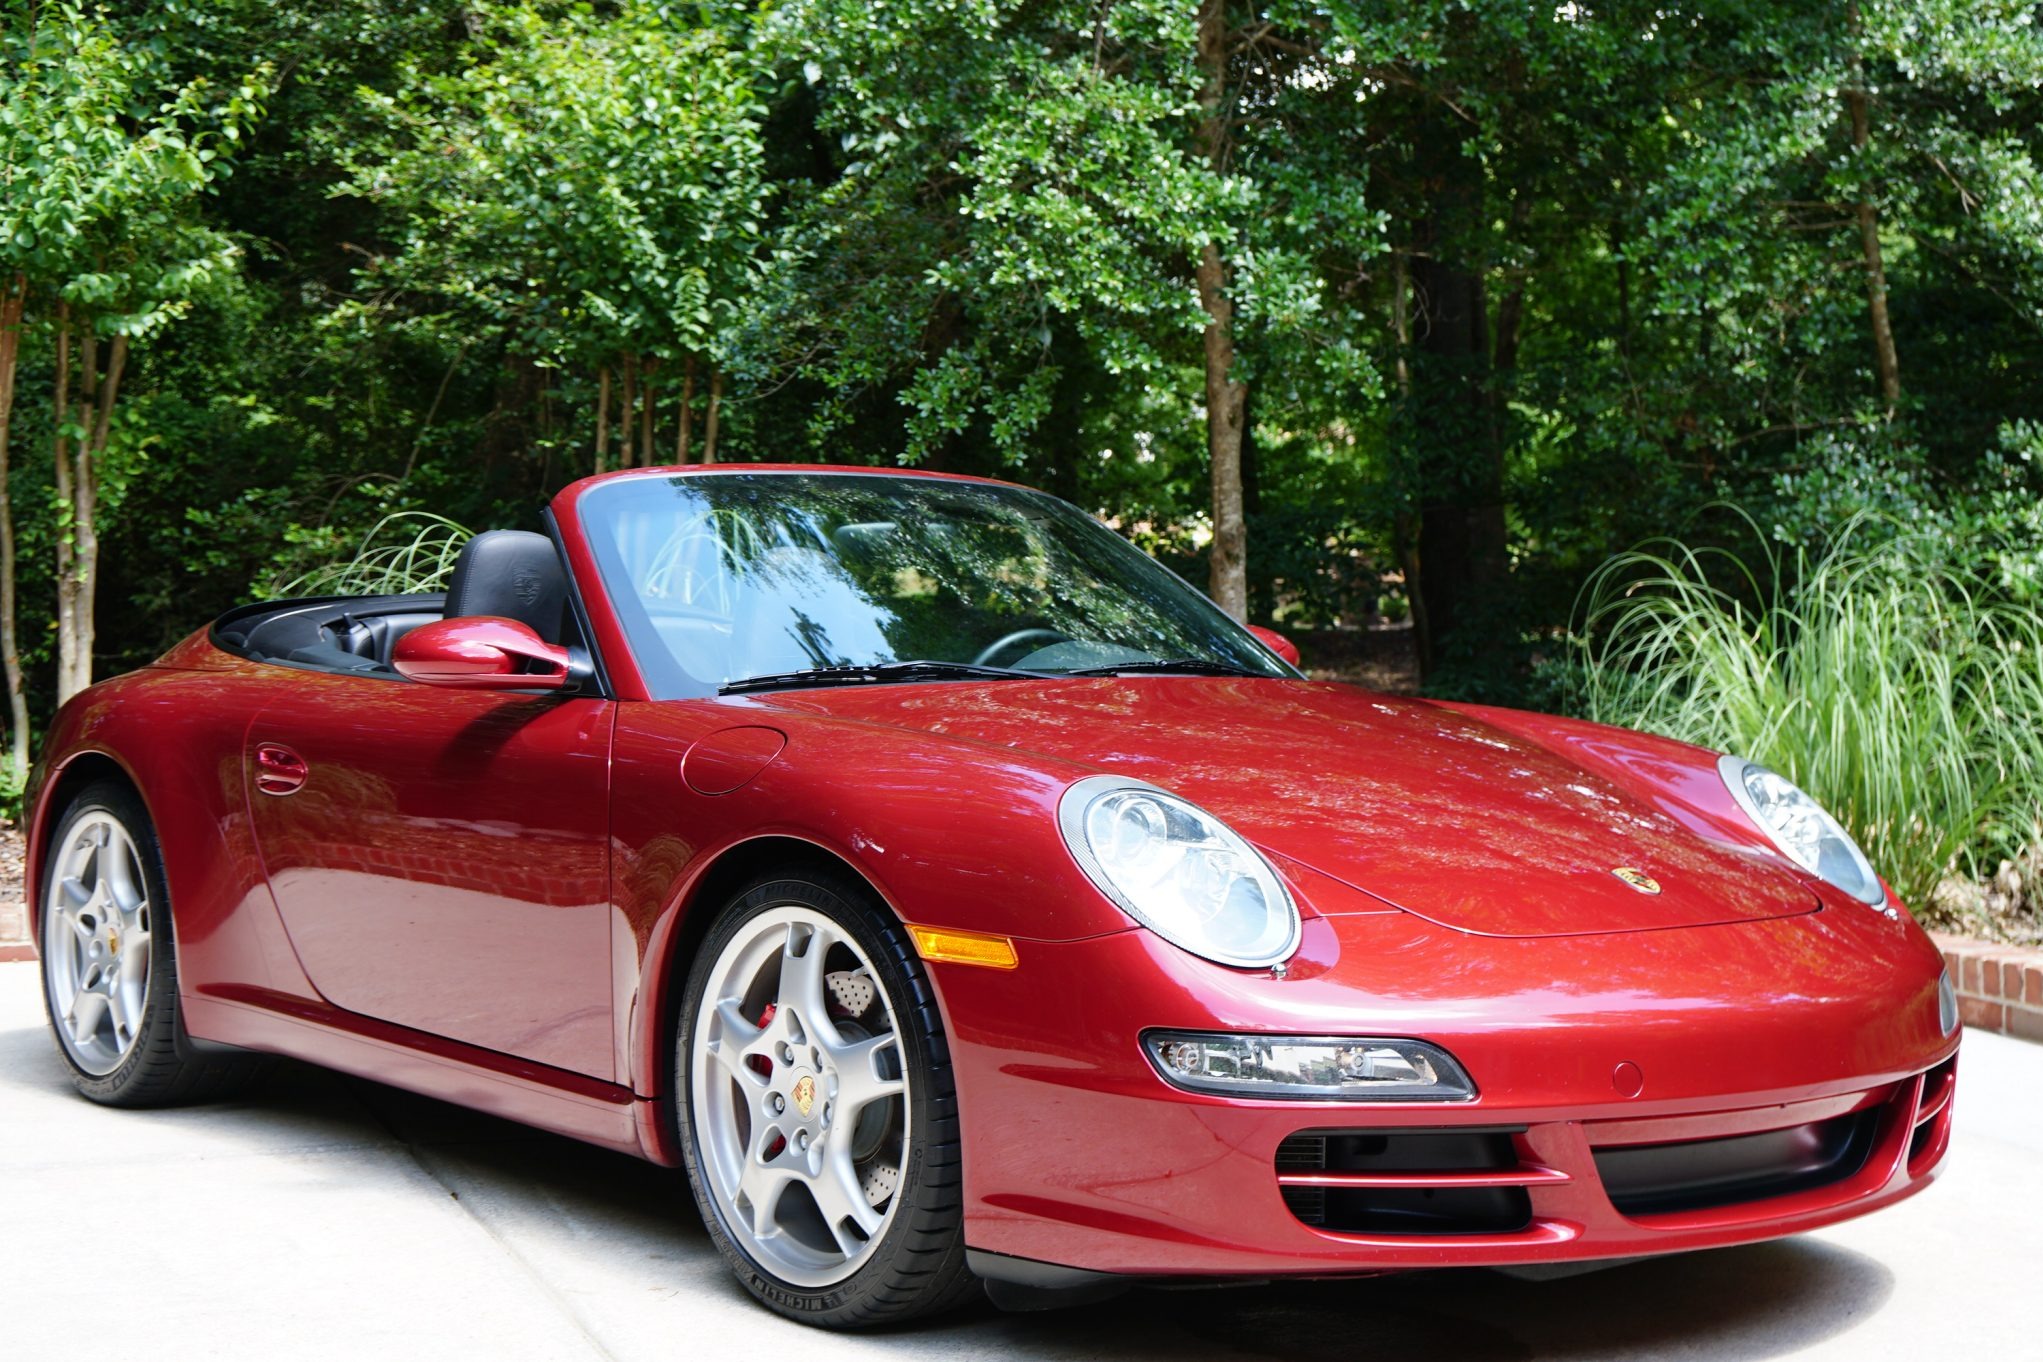 Used 49k-Mile 2008 Porsche 911 Carrera S Cabriolet 6-Speed Review